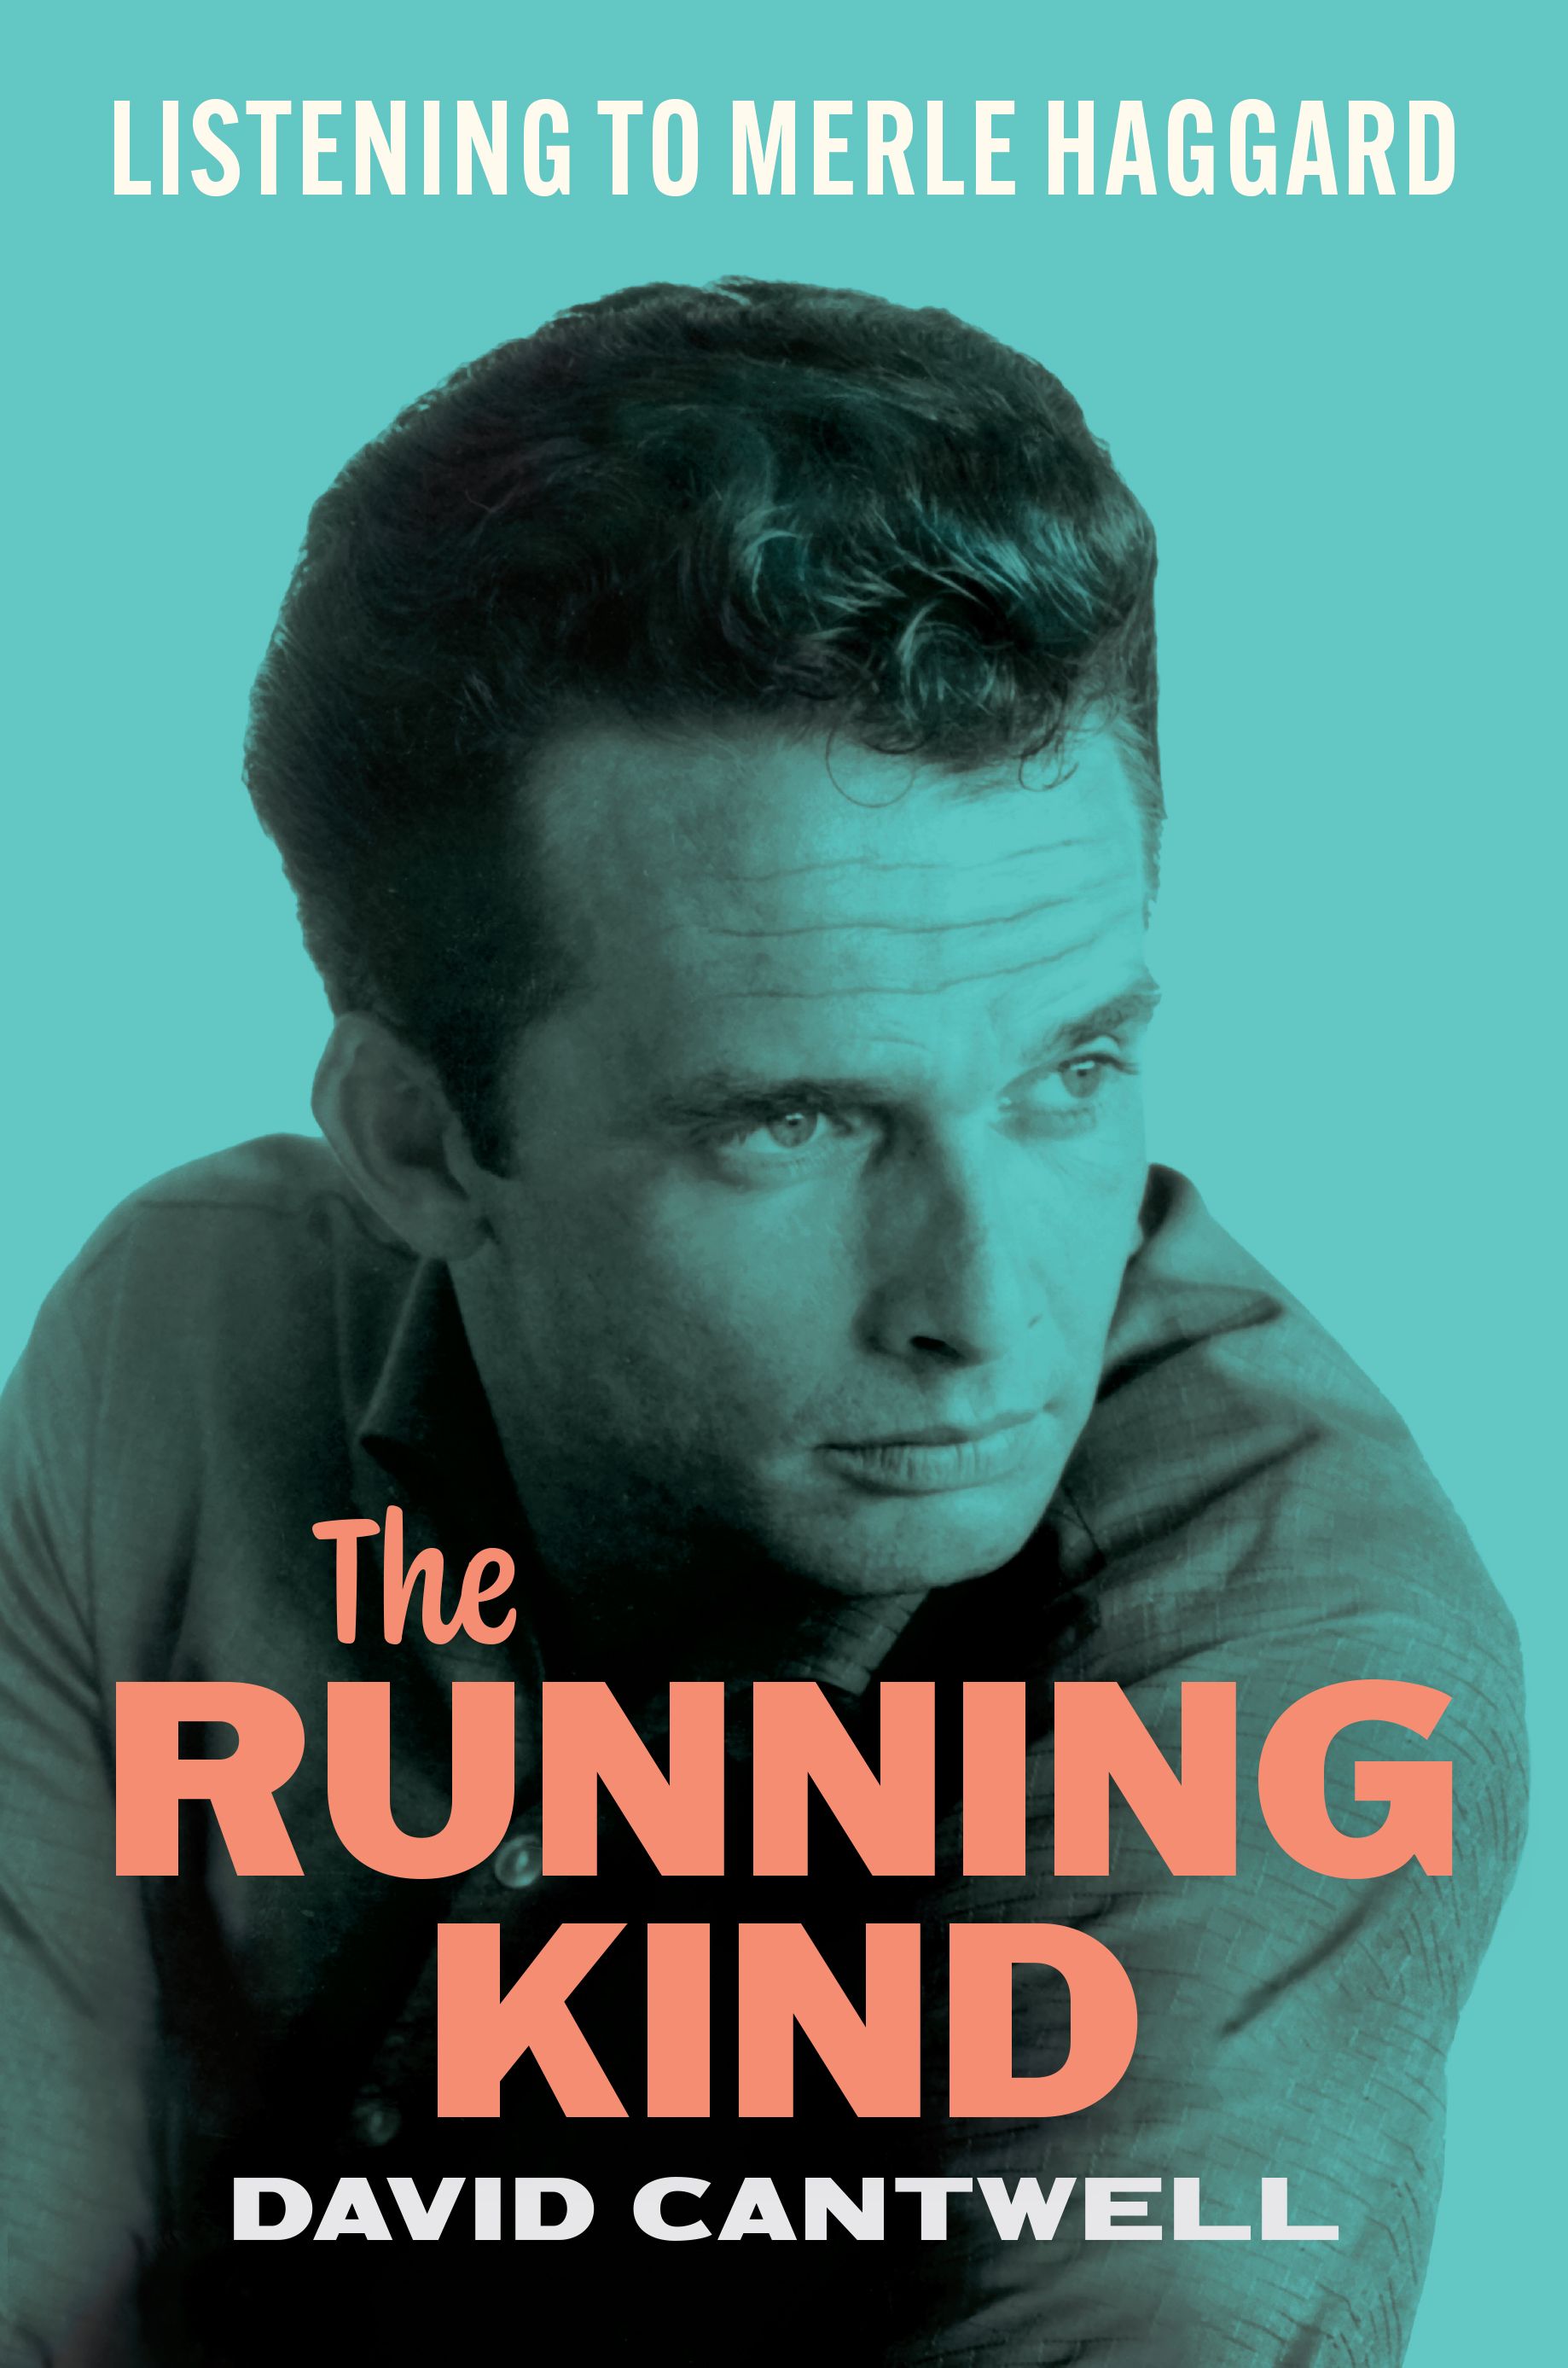 David Cantwell - The Running Kind: Listening To Merle Haggard Book Cover